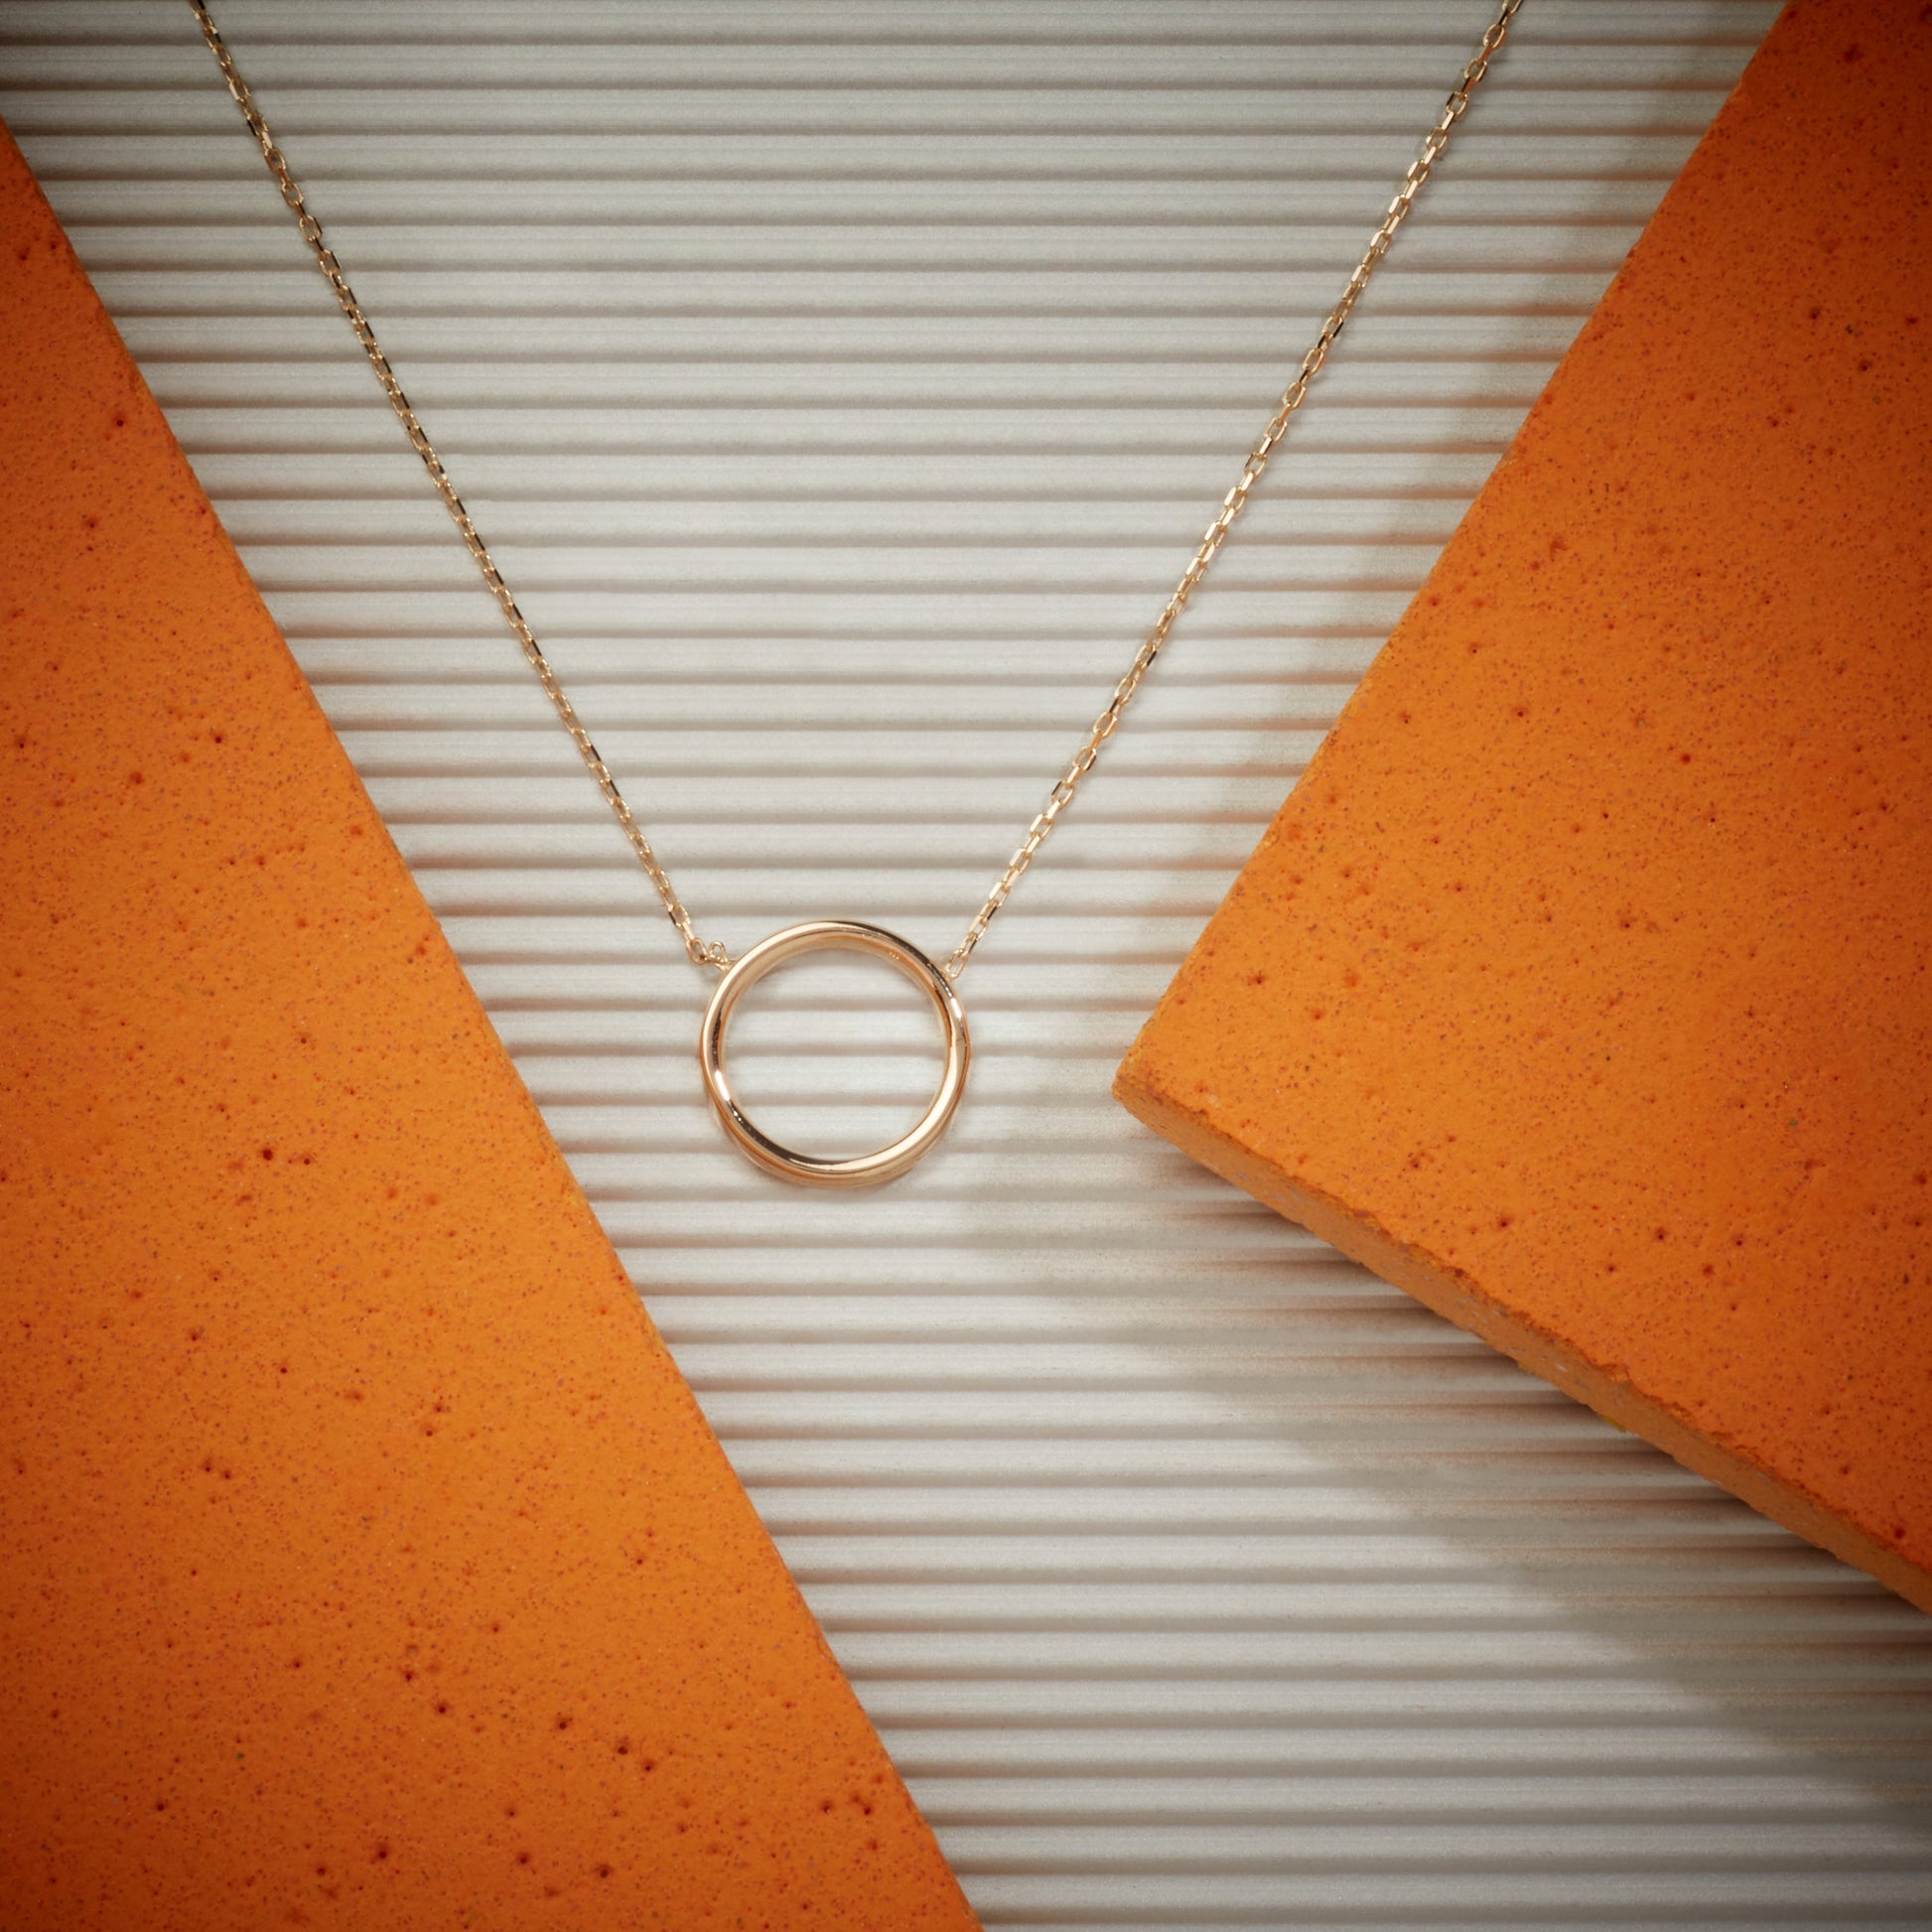 14k gold necklace, gold necklace women, solid gold necklace, gold circle pendant, 14k circle necklace, gold karma pendant, yellow rose white, geometric necklace, dainty gold necklace, minimalist necklace, open circle necklace, small gold circle, solid gold circle , 